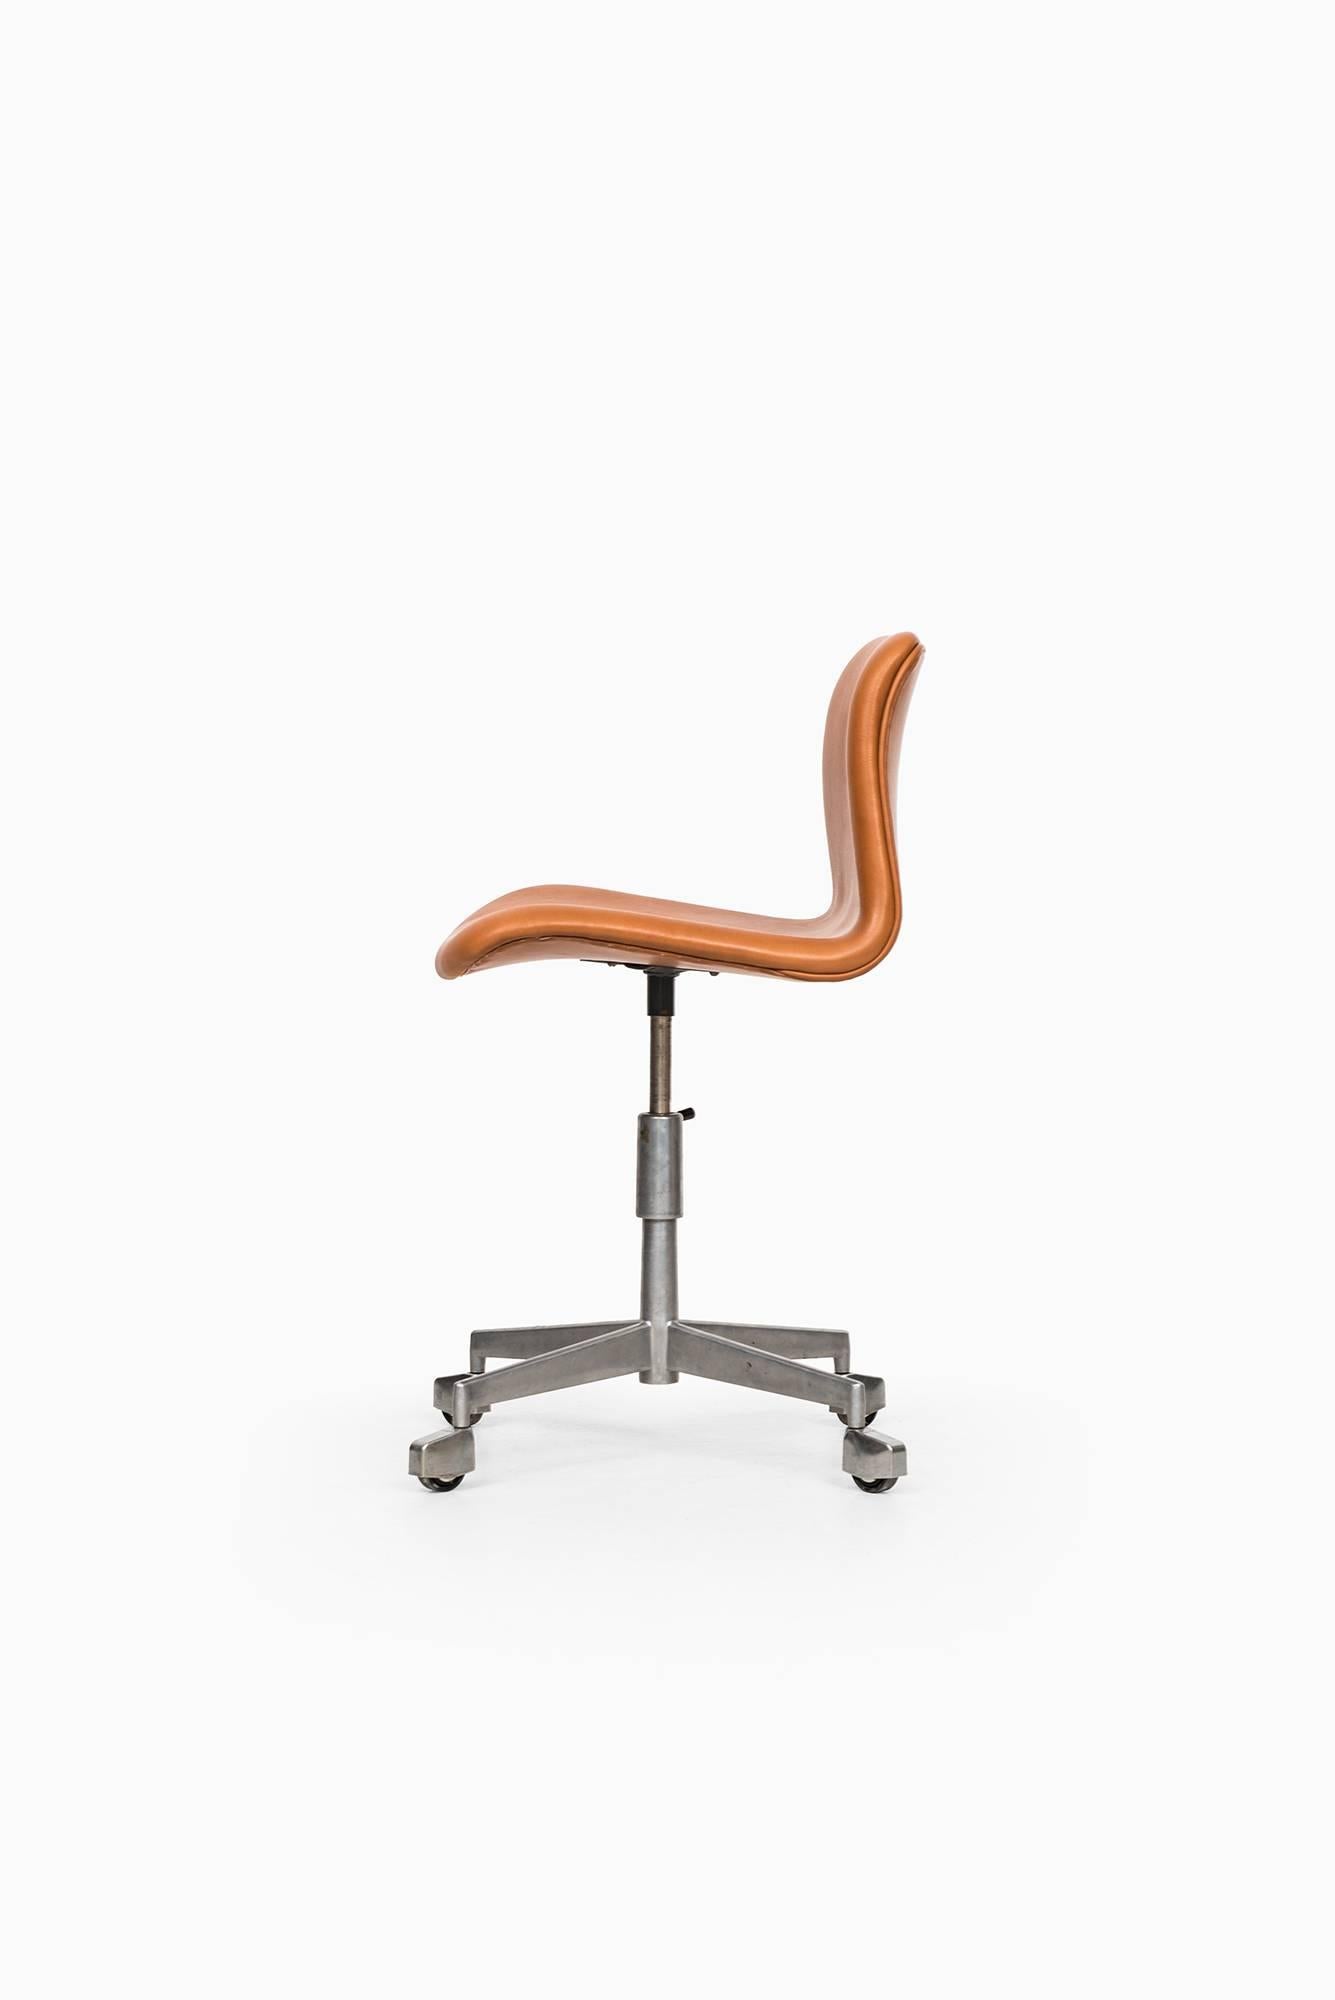 Mid-20th Century High Adjustable Office Chair Probably Produced in Denmark